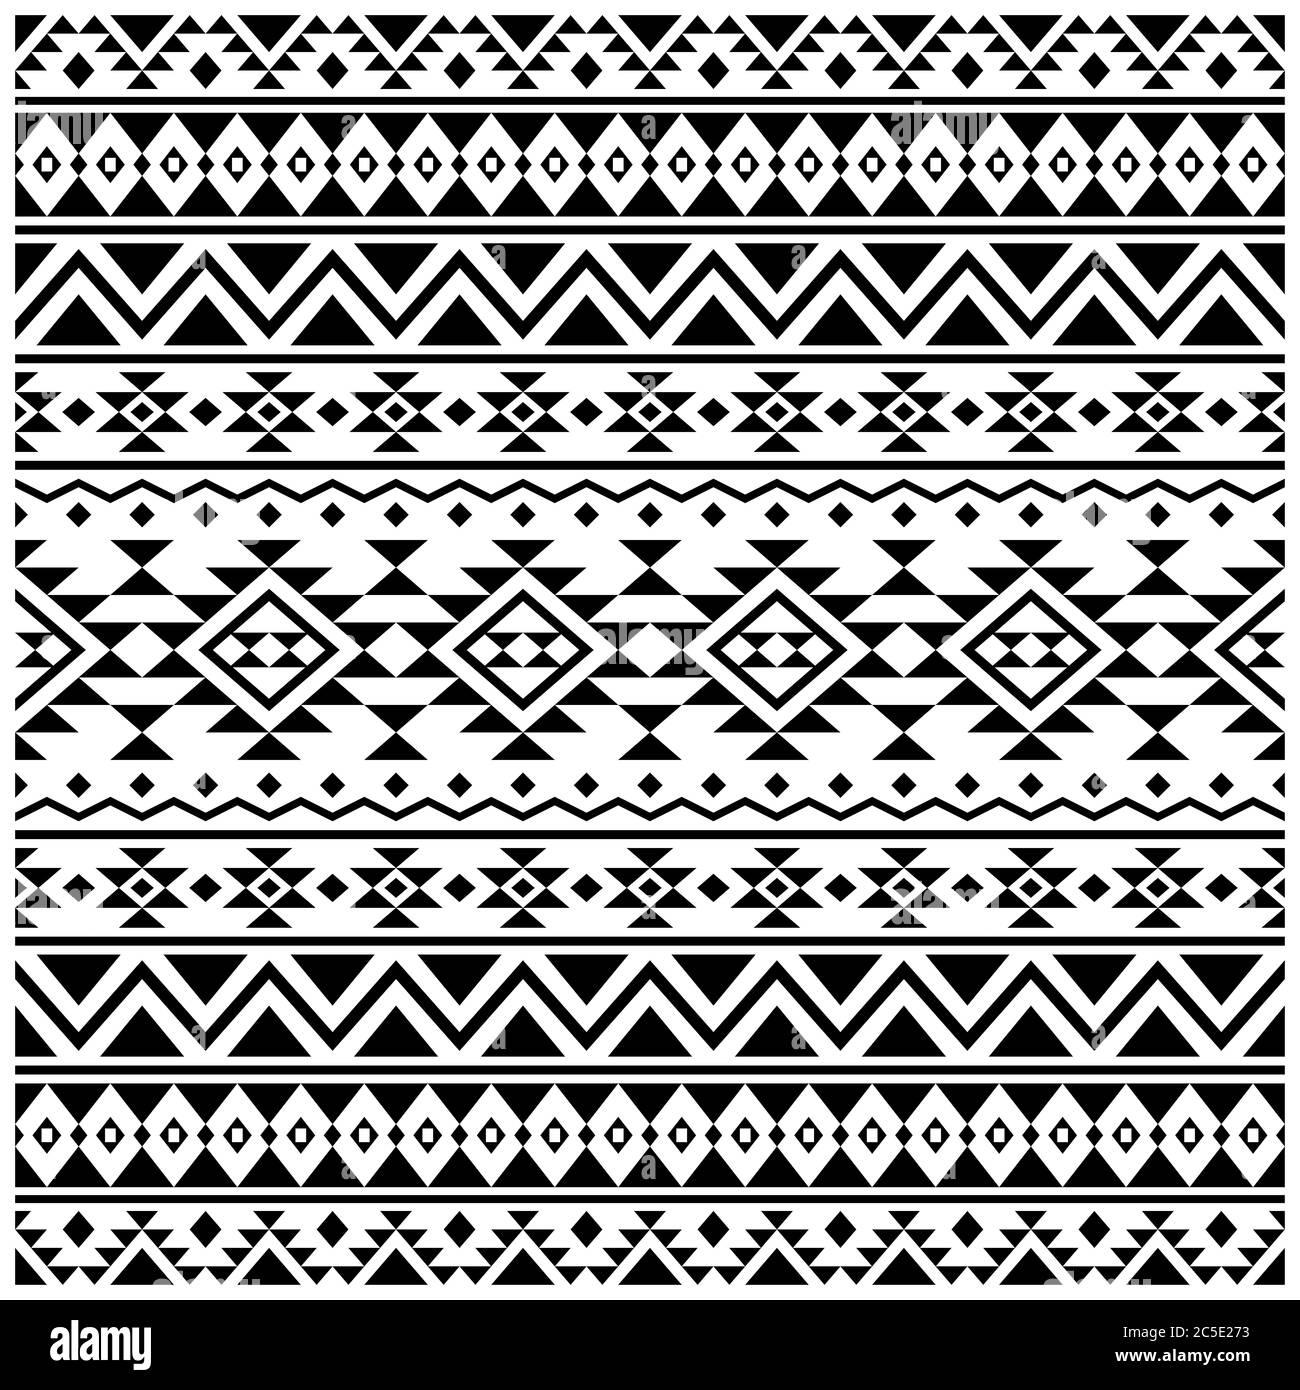 Traditional Seamless Ethnic Pattern texture design vector Stock Photo ...